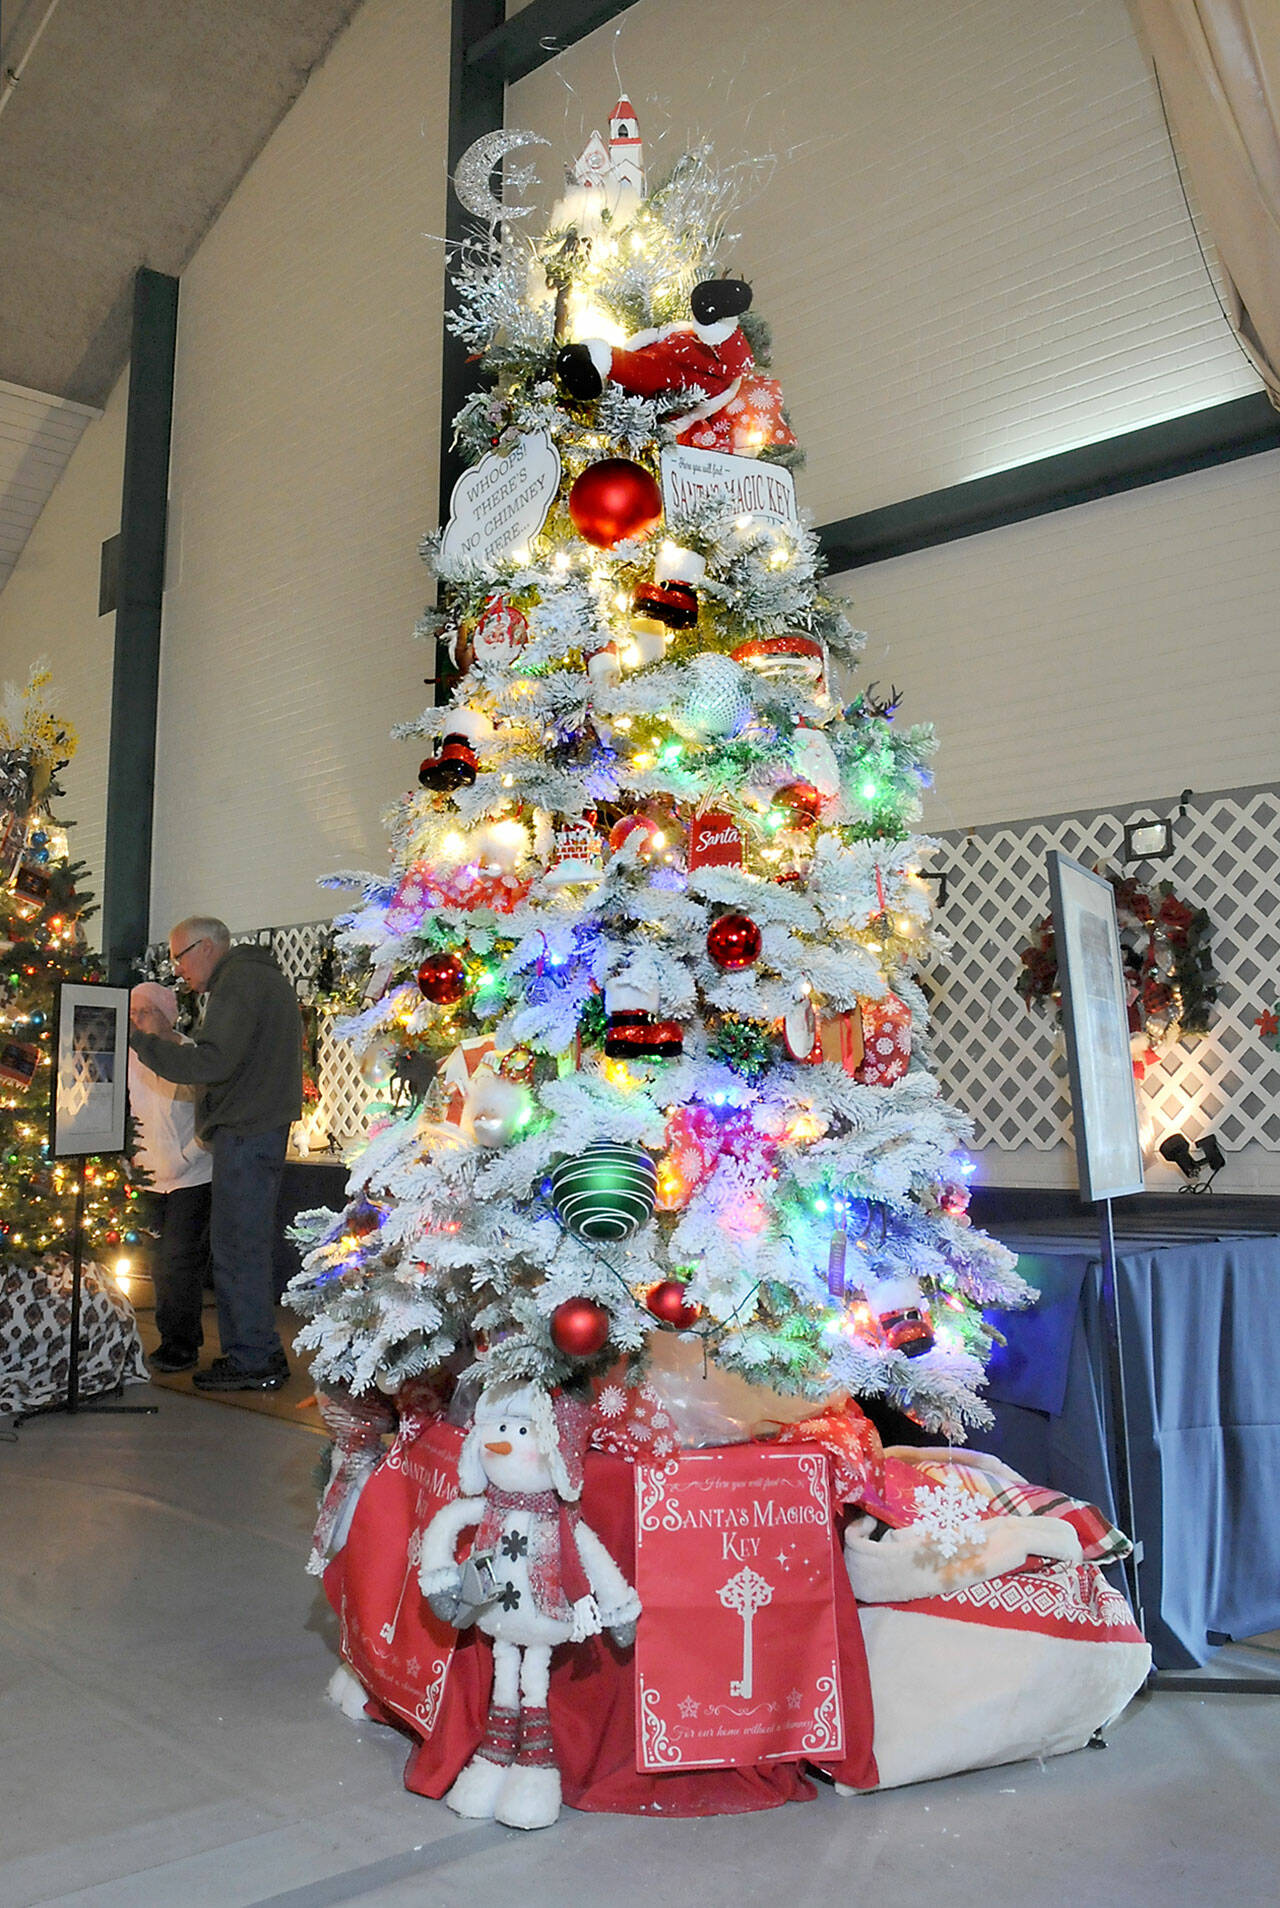 A Christmas tree titled “Santa’s Magic Key” stands tall at the 32nd annual Festival of Trees at Vern Burton Community Center in Port Angeles on Friday after it fetched the highest bid during Friday night’s gala auction benefiting the Olympic Medical Center Foundation. (Keith Thorpe/Peninsula Daily News)